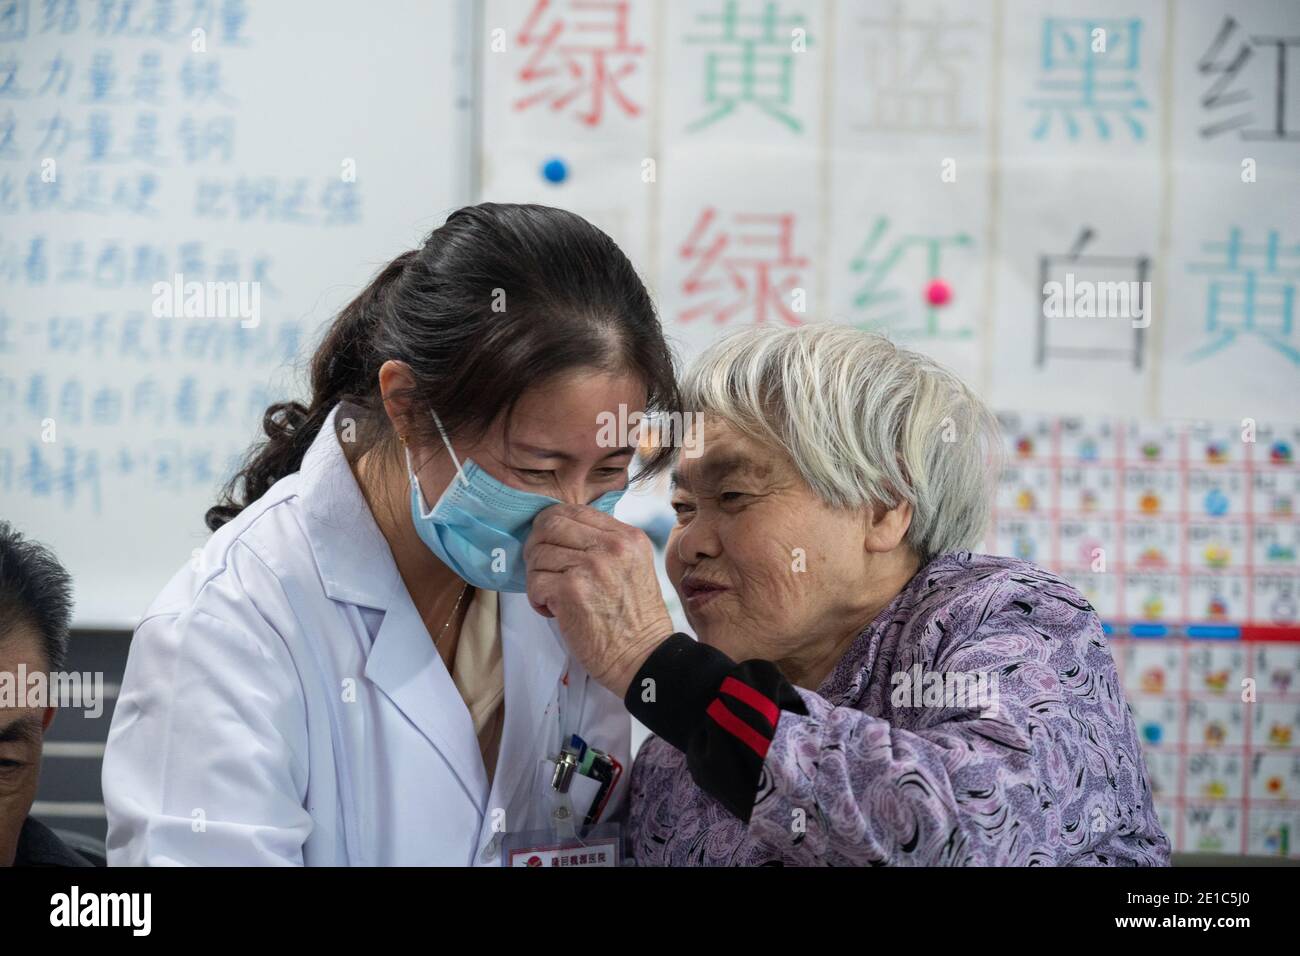 (210106) -- BEIJING, Jan. 6, 2021 (Xinhua) -- An elderly woman interacts with a medical worker at Wei Yuan hospital in Longhui County, central China's Hunan Province, Oct. 12, 2020. The hospital set up the geriatric unit in 2010, which provides nursing, rehabilitation, entertainment and food services to elderly residents. (Xinhua/Cai Yang) Stock Photo